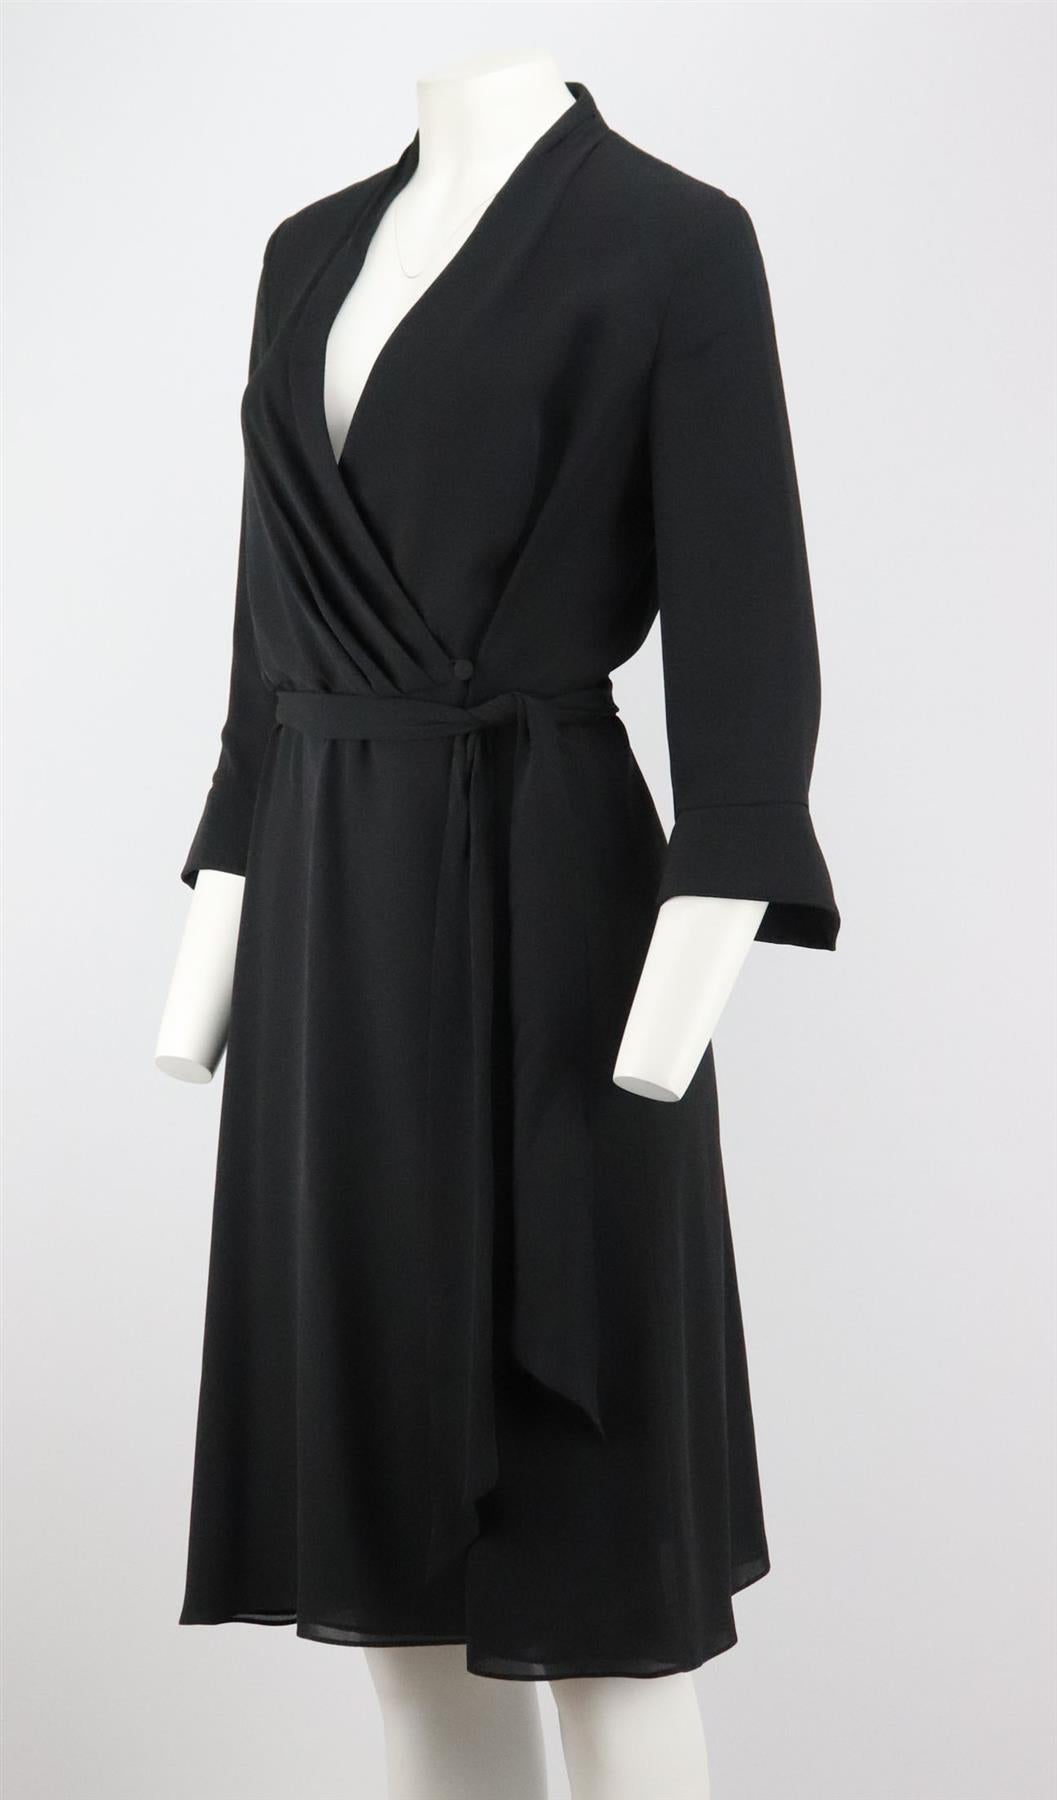 This dress by Escada is cut from silk in a wrap silhouette complete with a plunging v-neck collar and belt fastening with slightly puffed sleeves. Black silk. Button and belt fastening at front. 100% Silk; lining: 100% silk. Size: DE 38 (UK 12, US